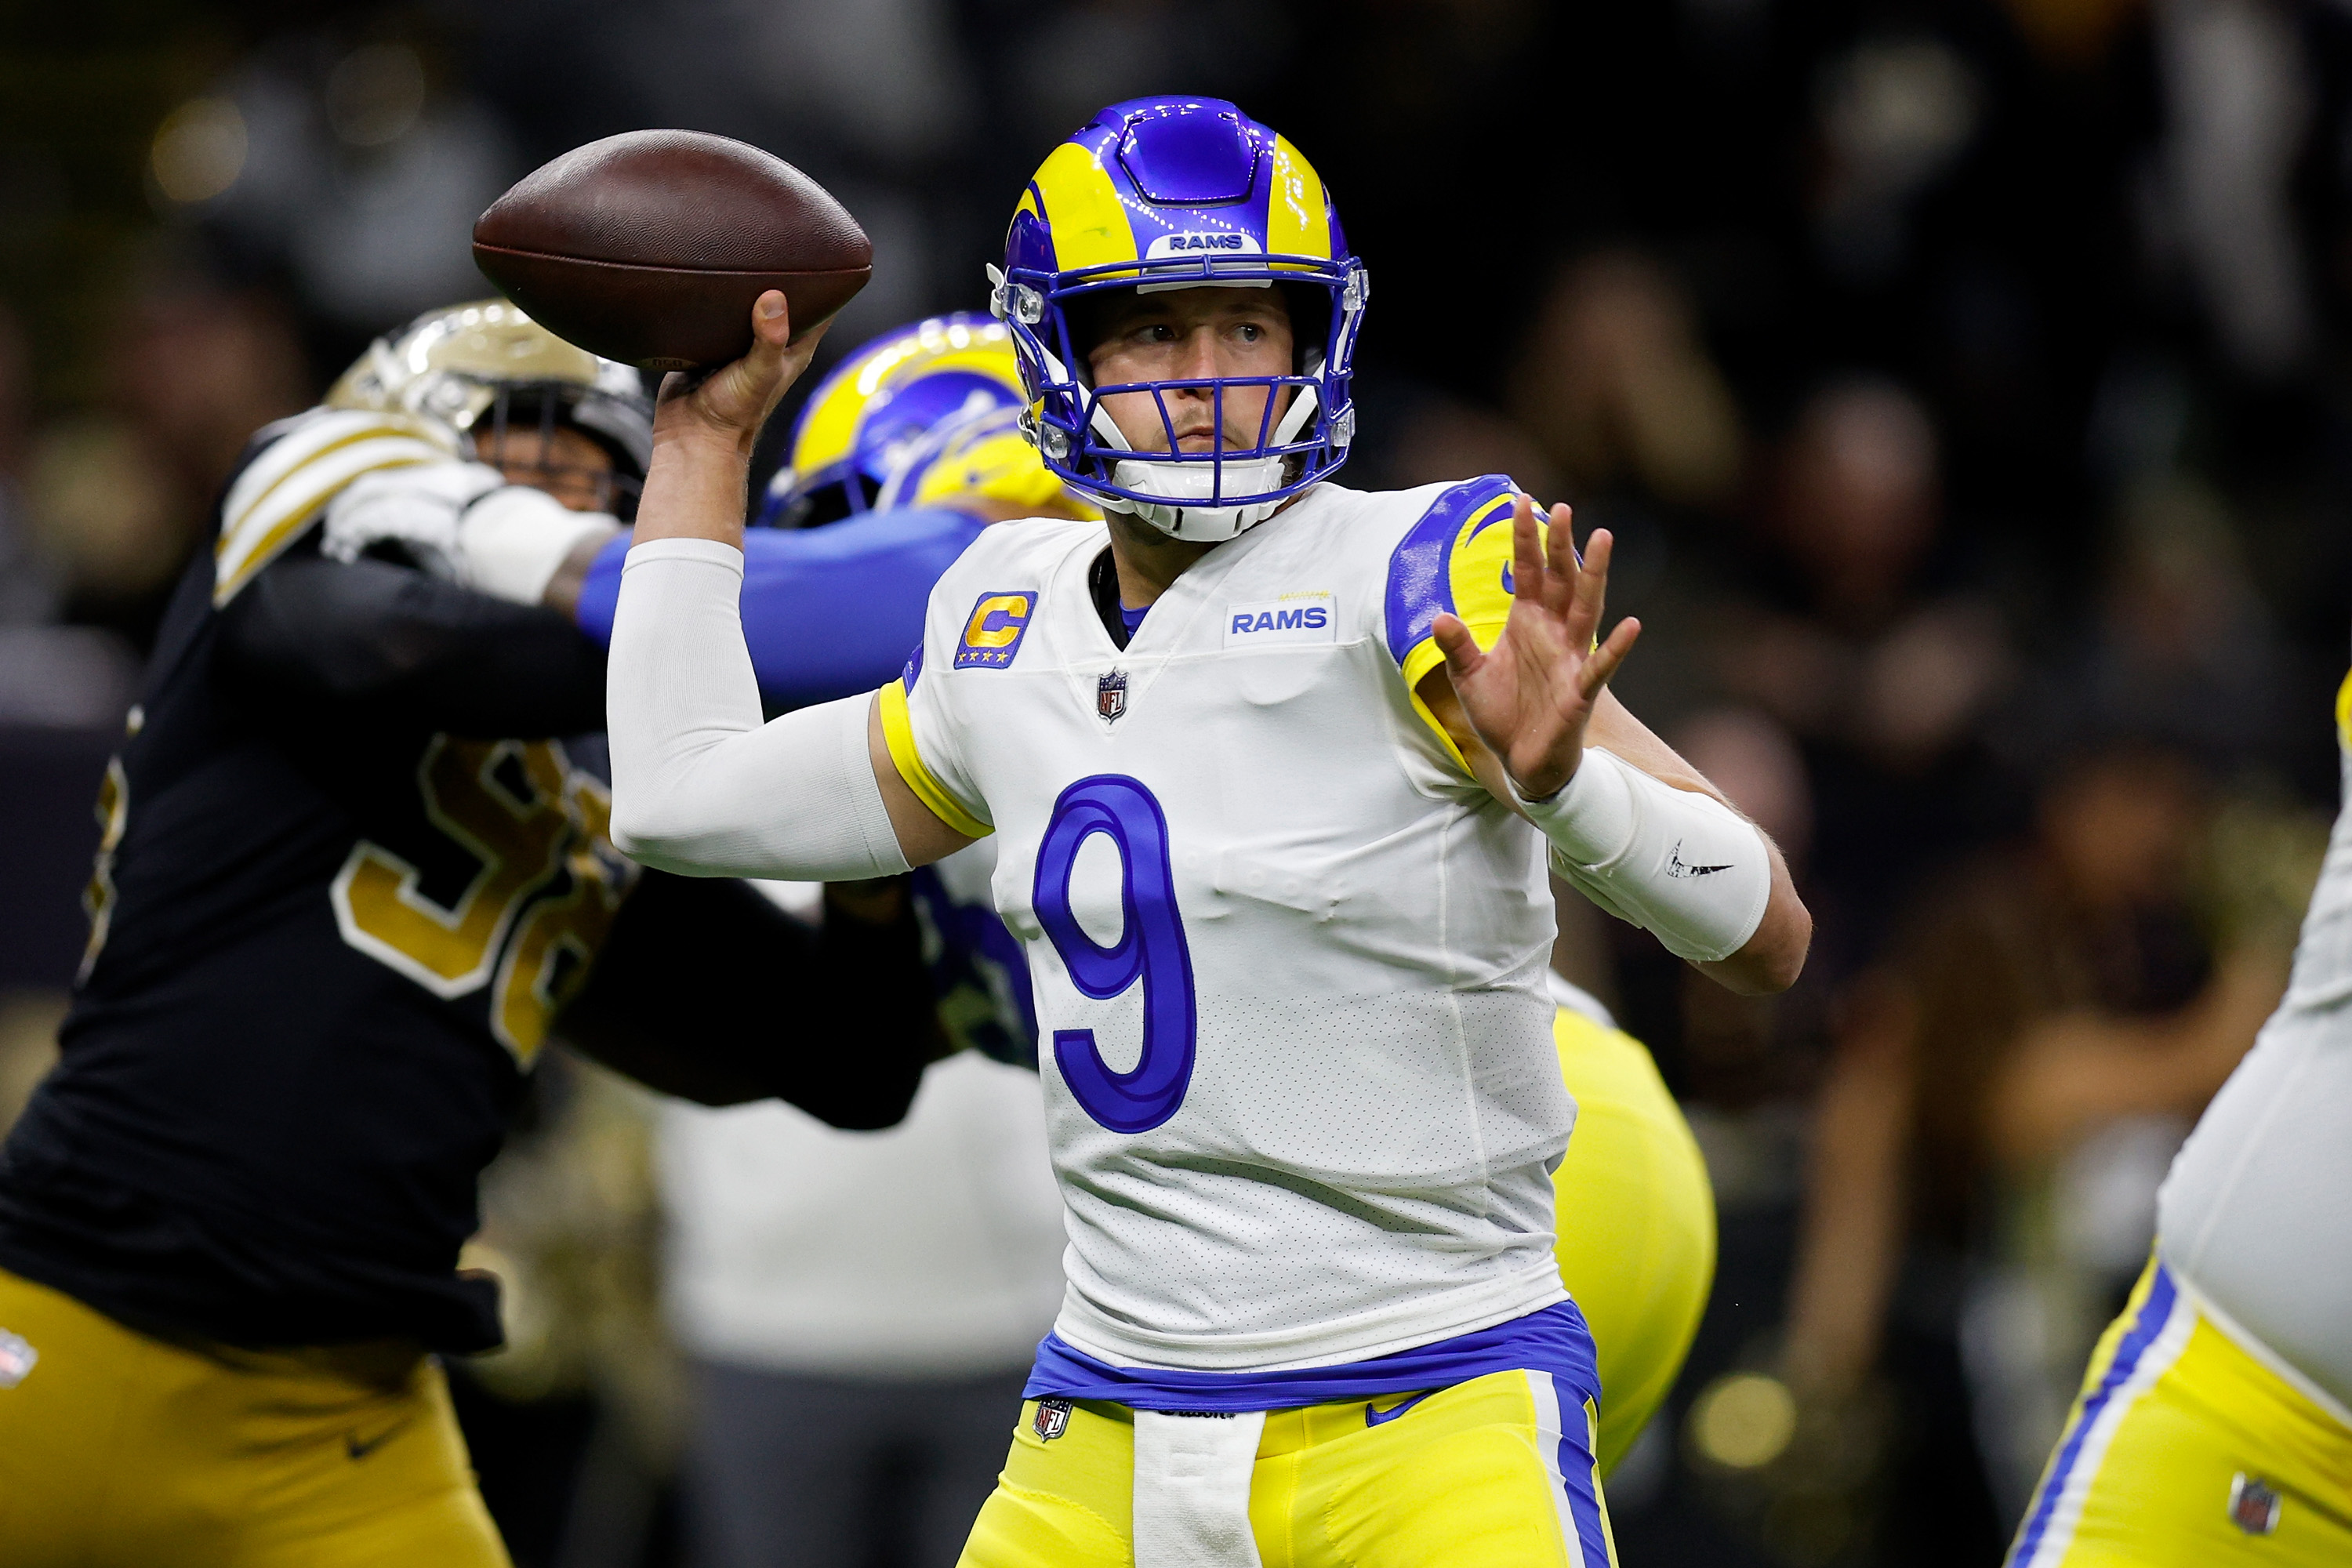 Quarterback Matthew Stafford of the Los Angeles Rams passes in the game against the New Orleans Saints at Caesars Superdome in New Orleans, Louisiana, November 20, 2022. /CFP